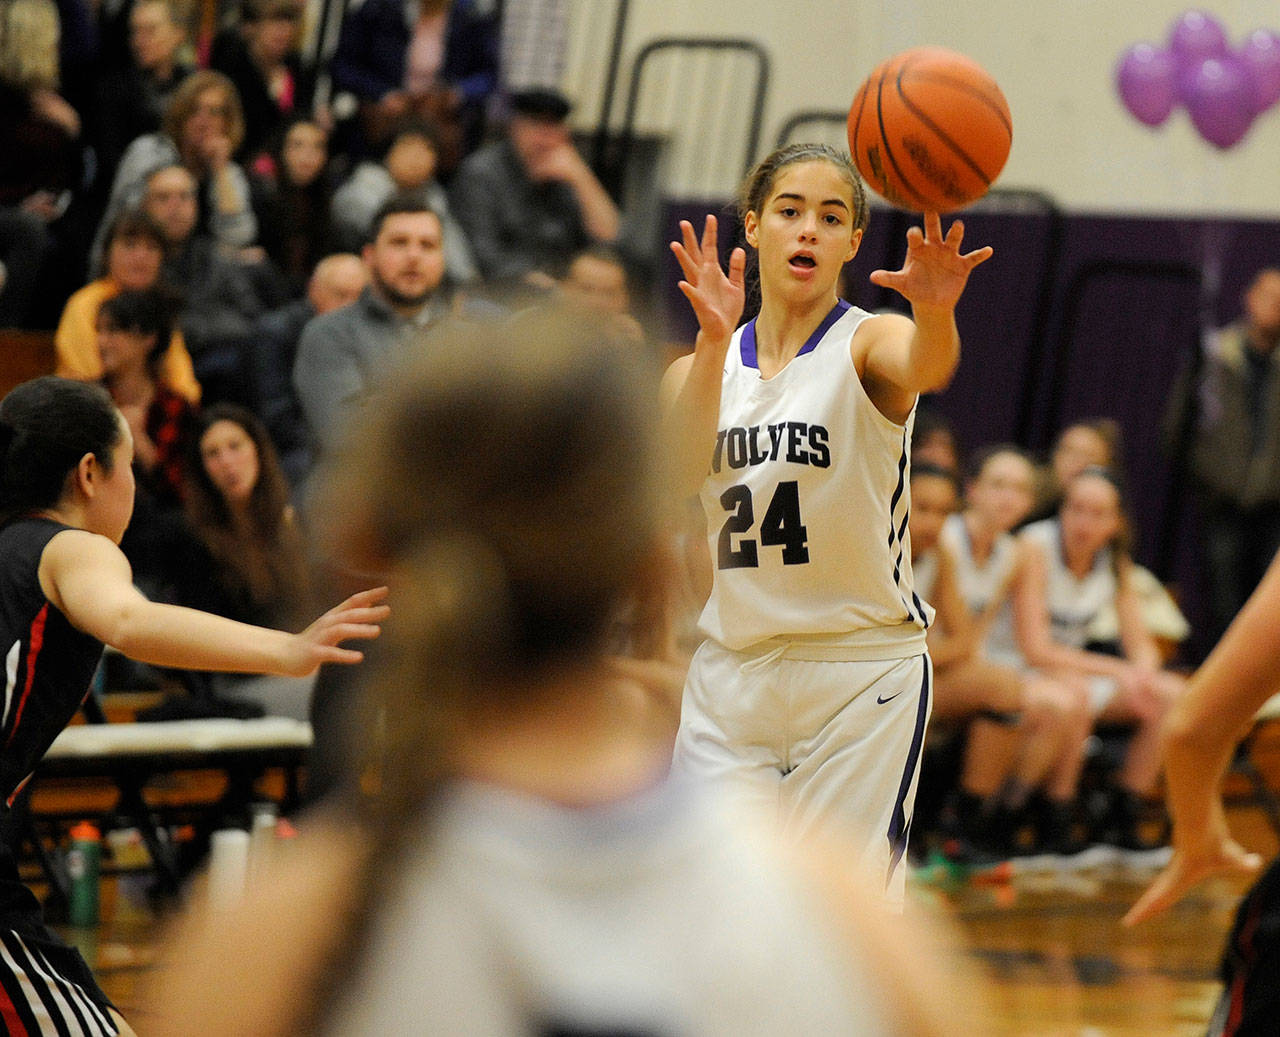 Winter sports preview: SHS girls hoops’ experience, youth look to return SHS to playoffs